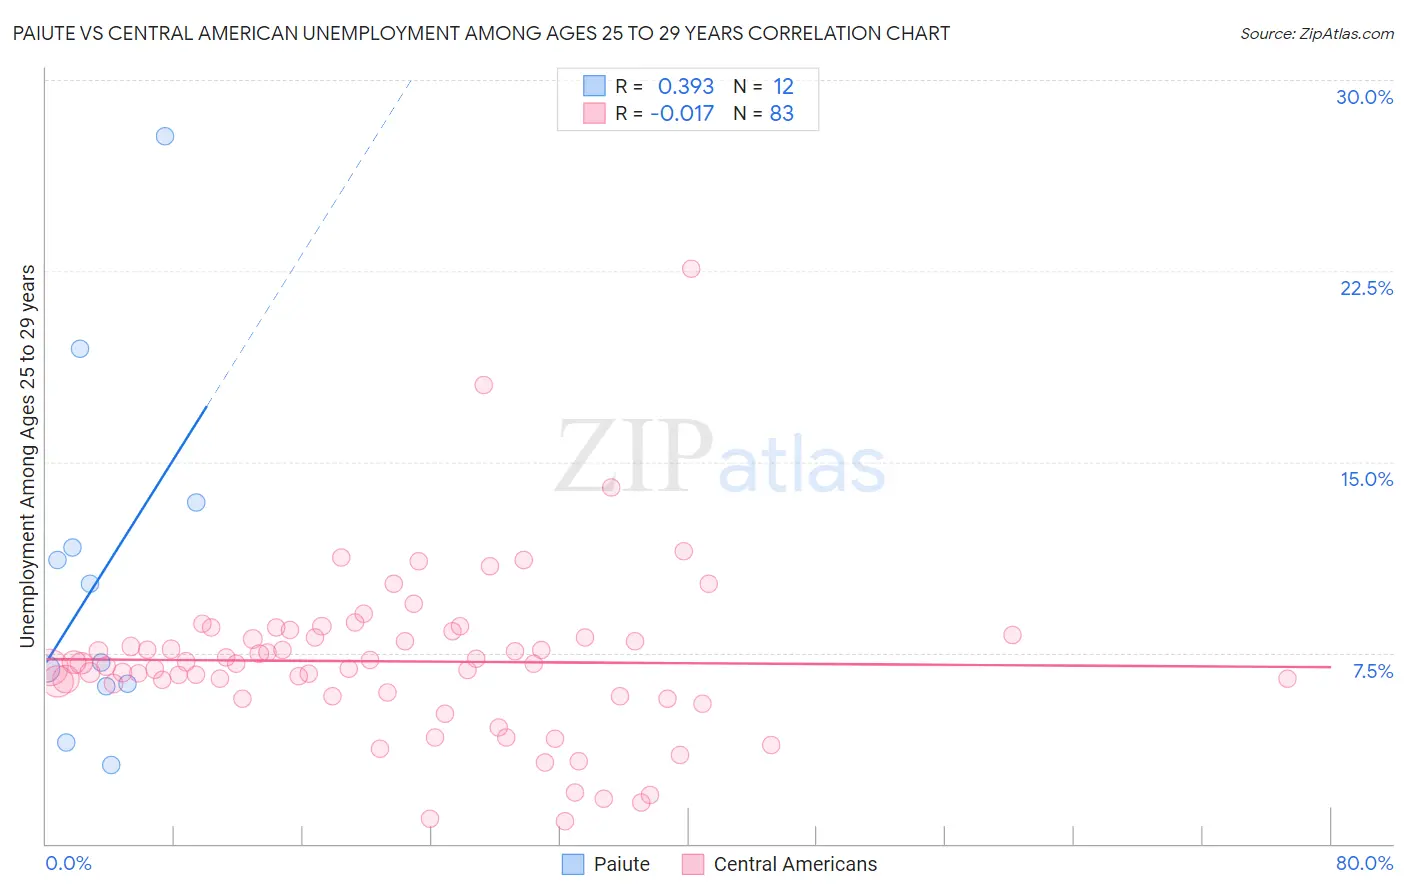 Paiute vs Central American Unemployment Among Ages 25 to 29 years